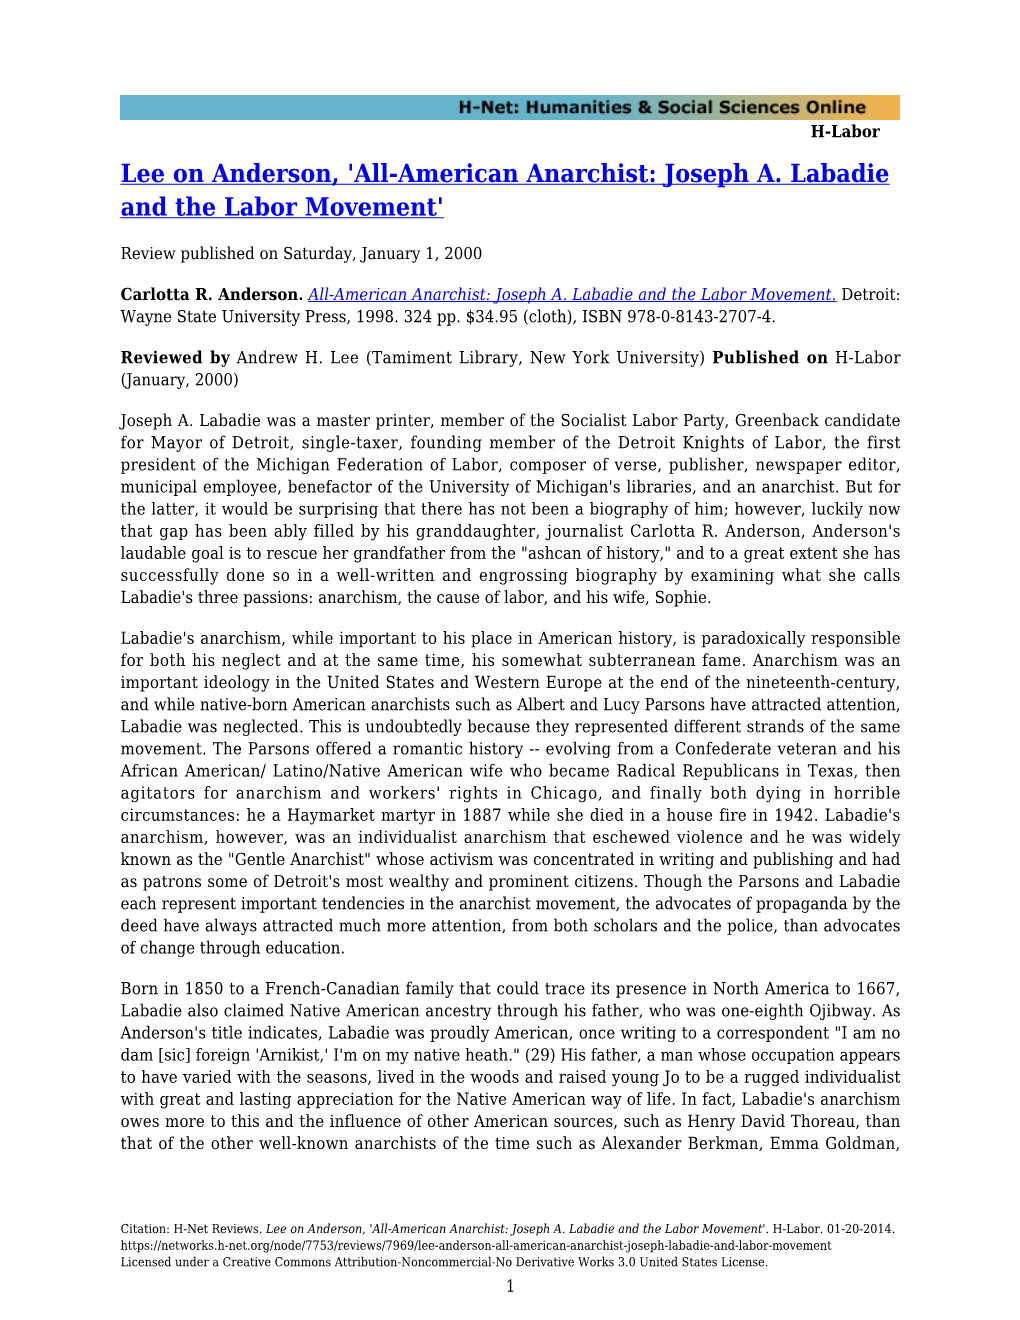 All-American Anarchist: Joseph A. Labadie and the Labor Movement'